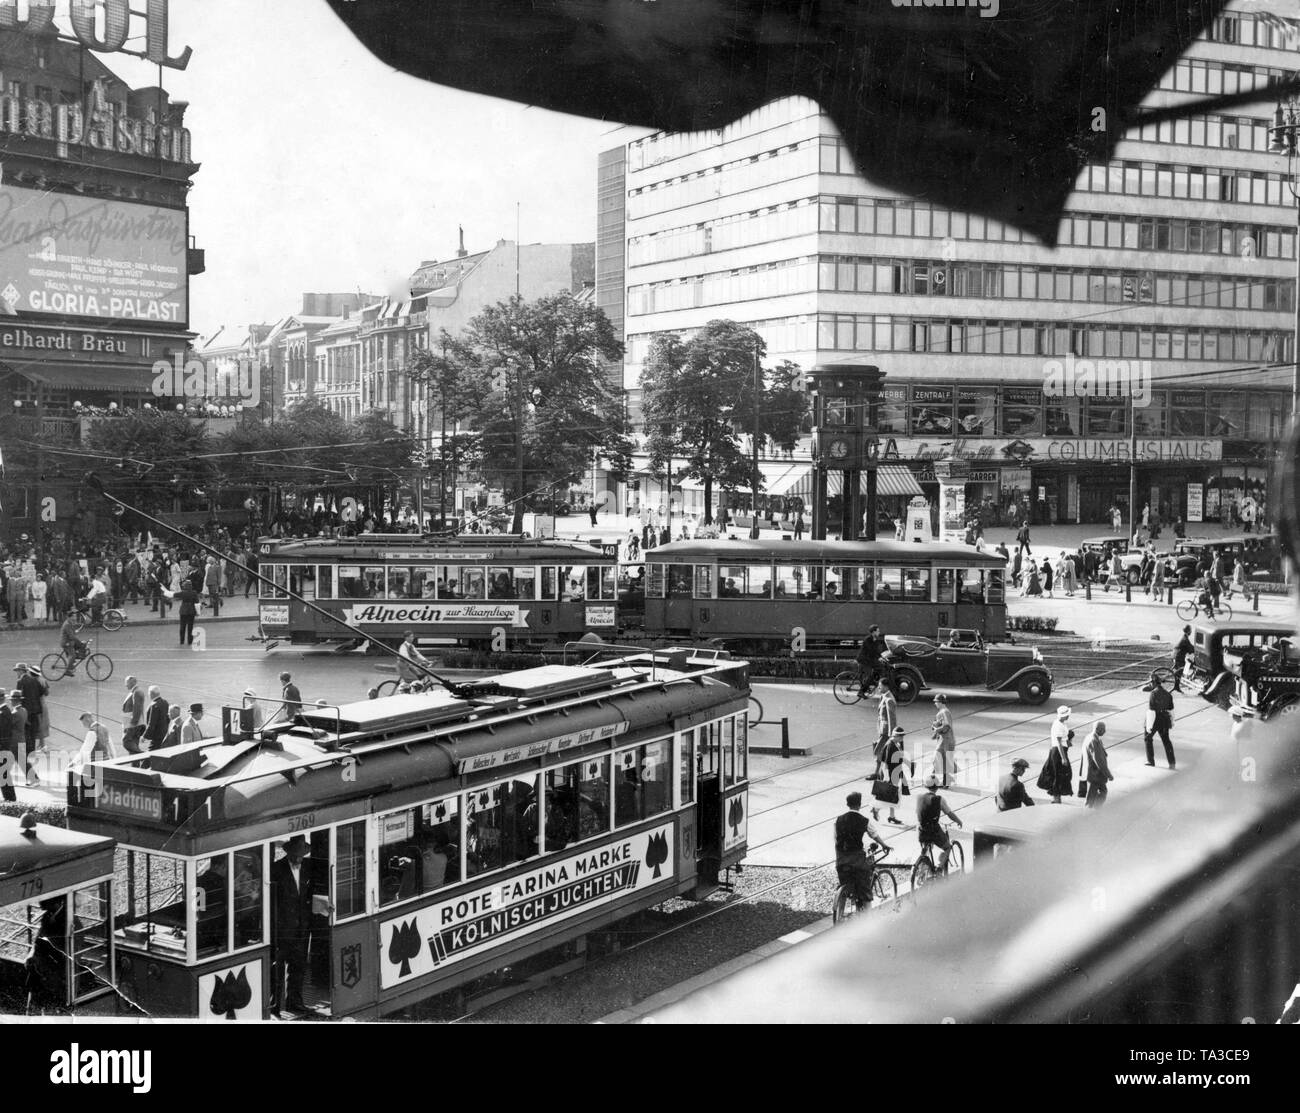 View of the Potsdamer Platz, in the background on the right the Columbus Haus, on the left the Gloria Palast. Undated photo. Stock Photo